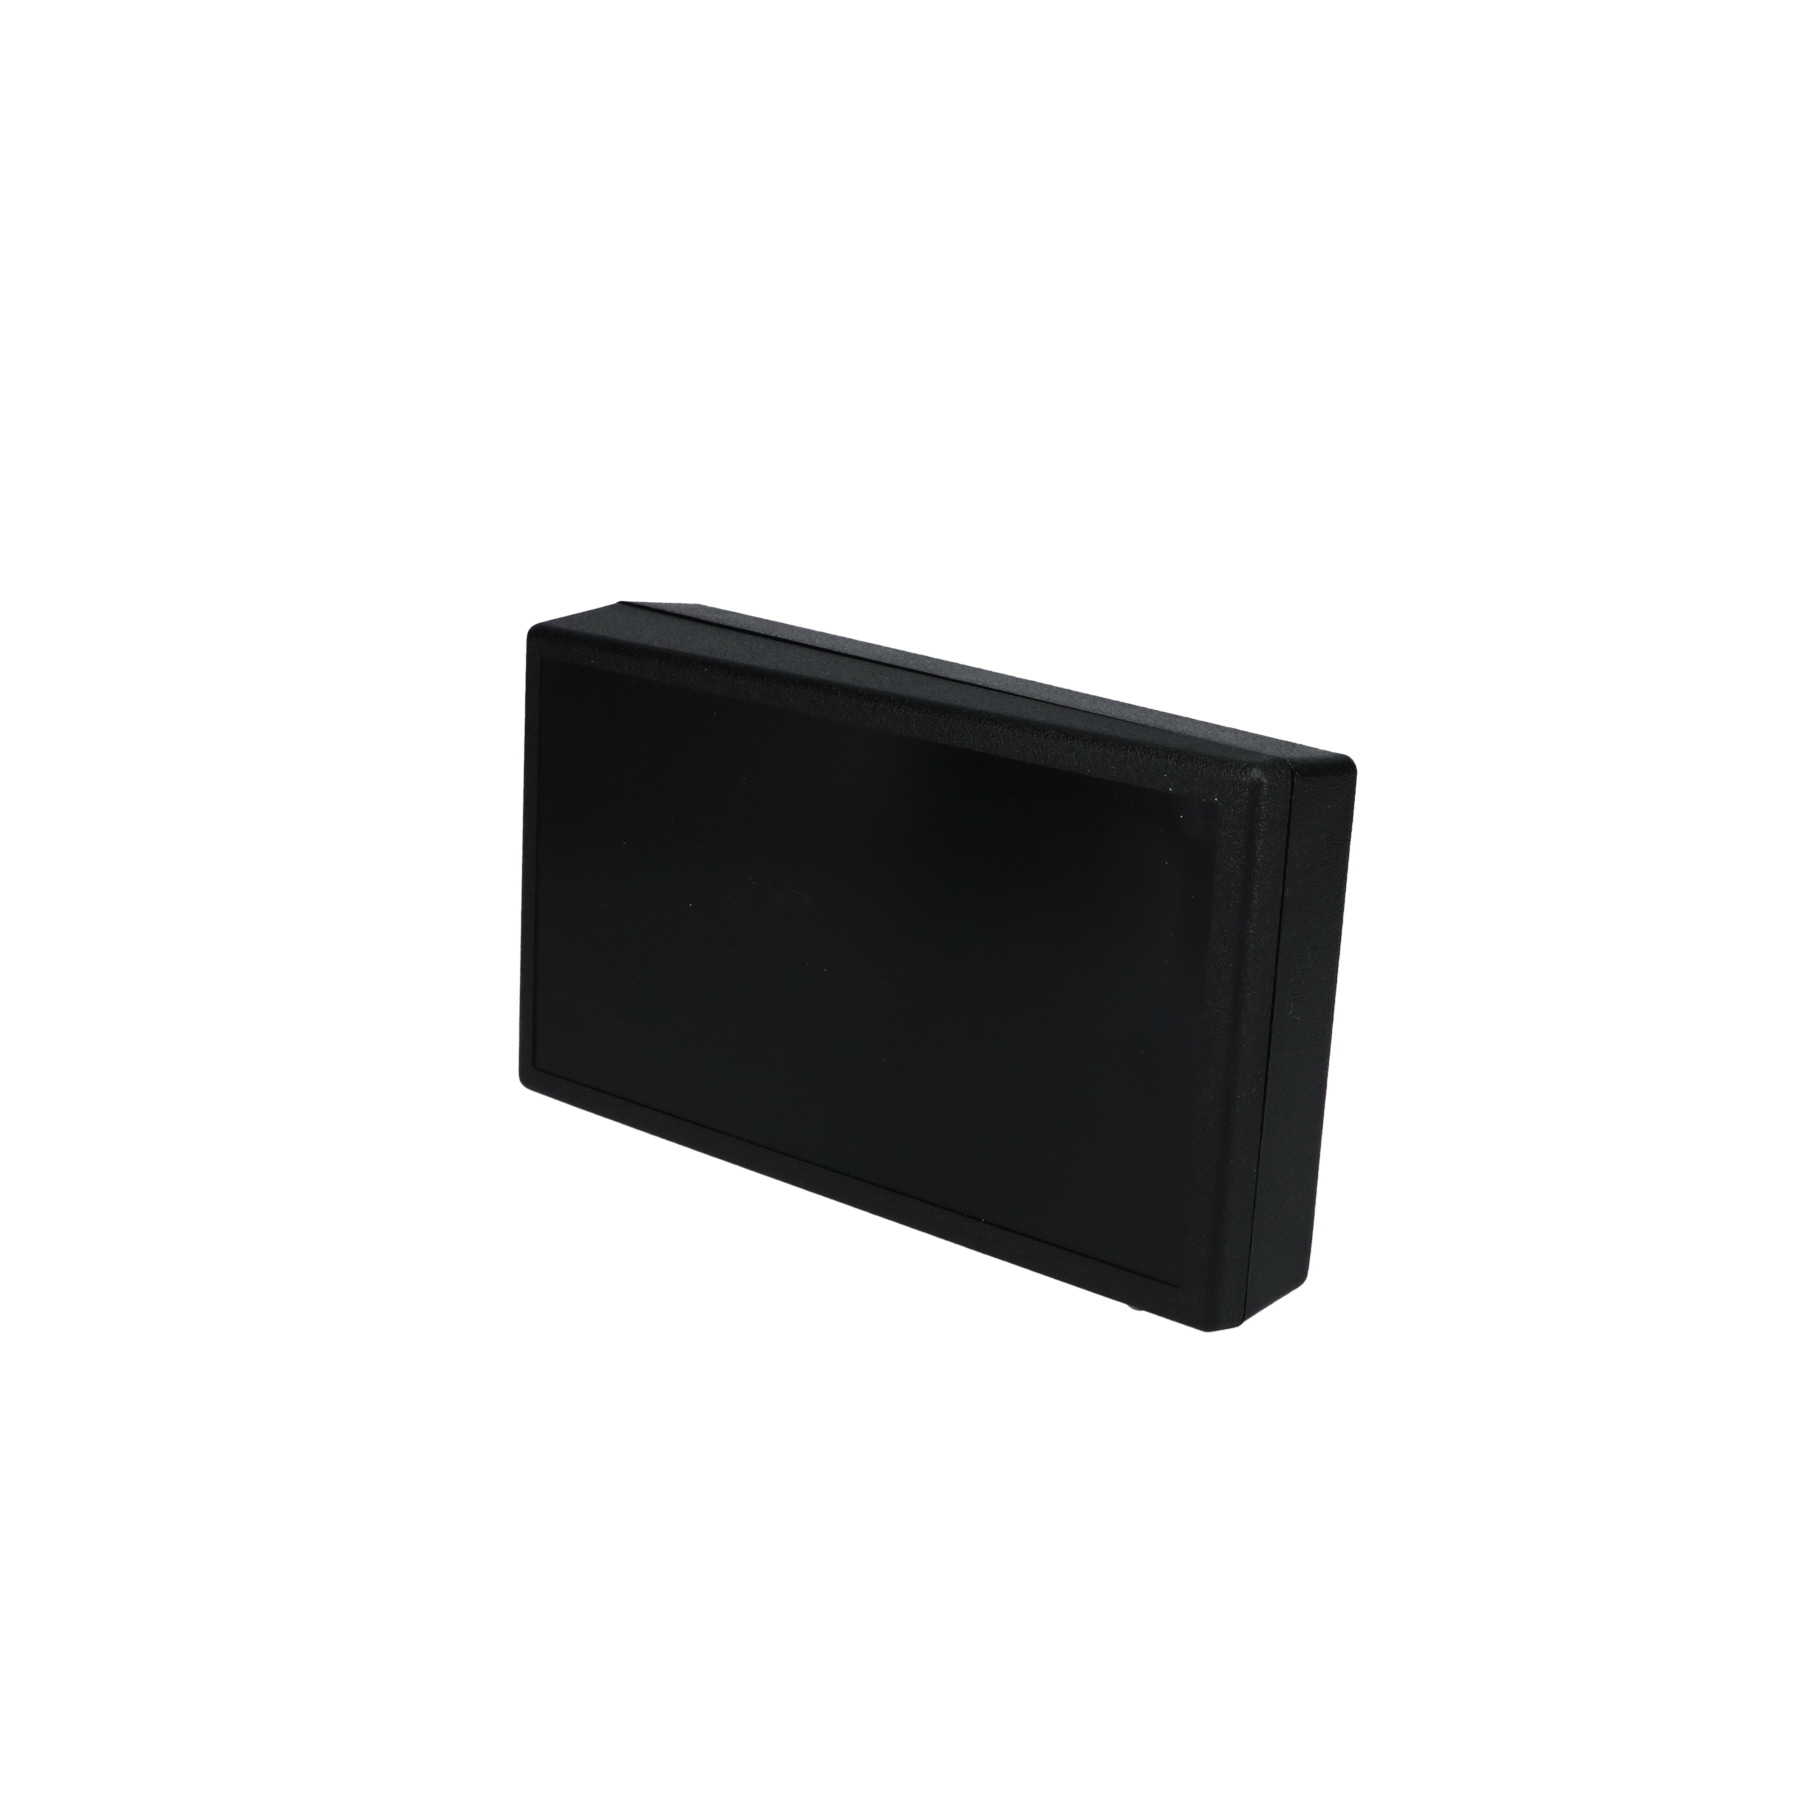 Plastibox Style B Series Plastic Electronic Enclosure with Smooth Insert Black PS-11292-B